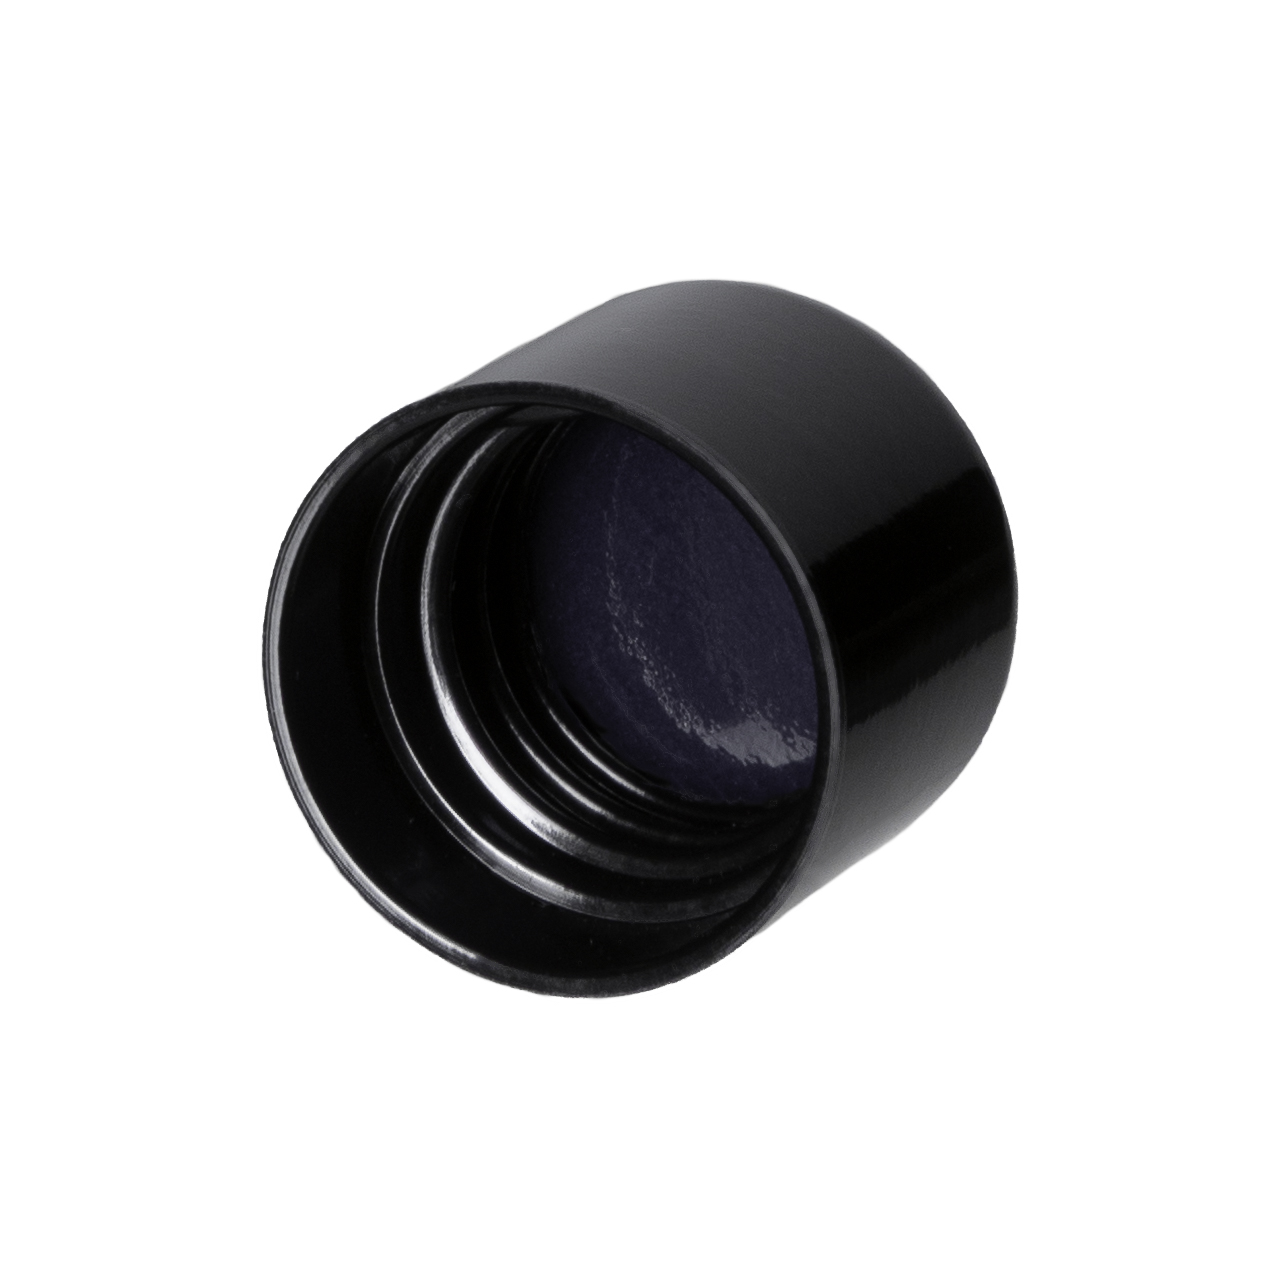 Screw cap DIN18, Urea, black, semi-glossy finish with violet Phan inlay (for Orion 5-100 ml)